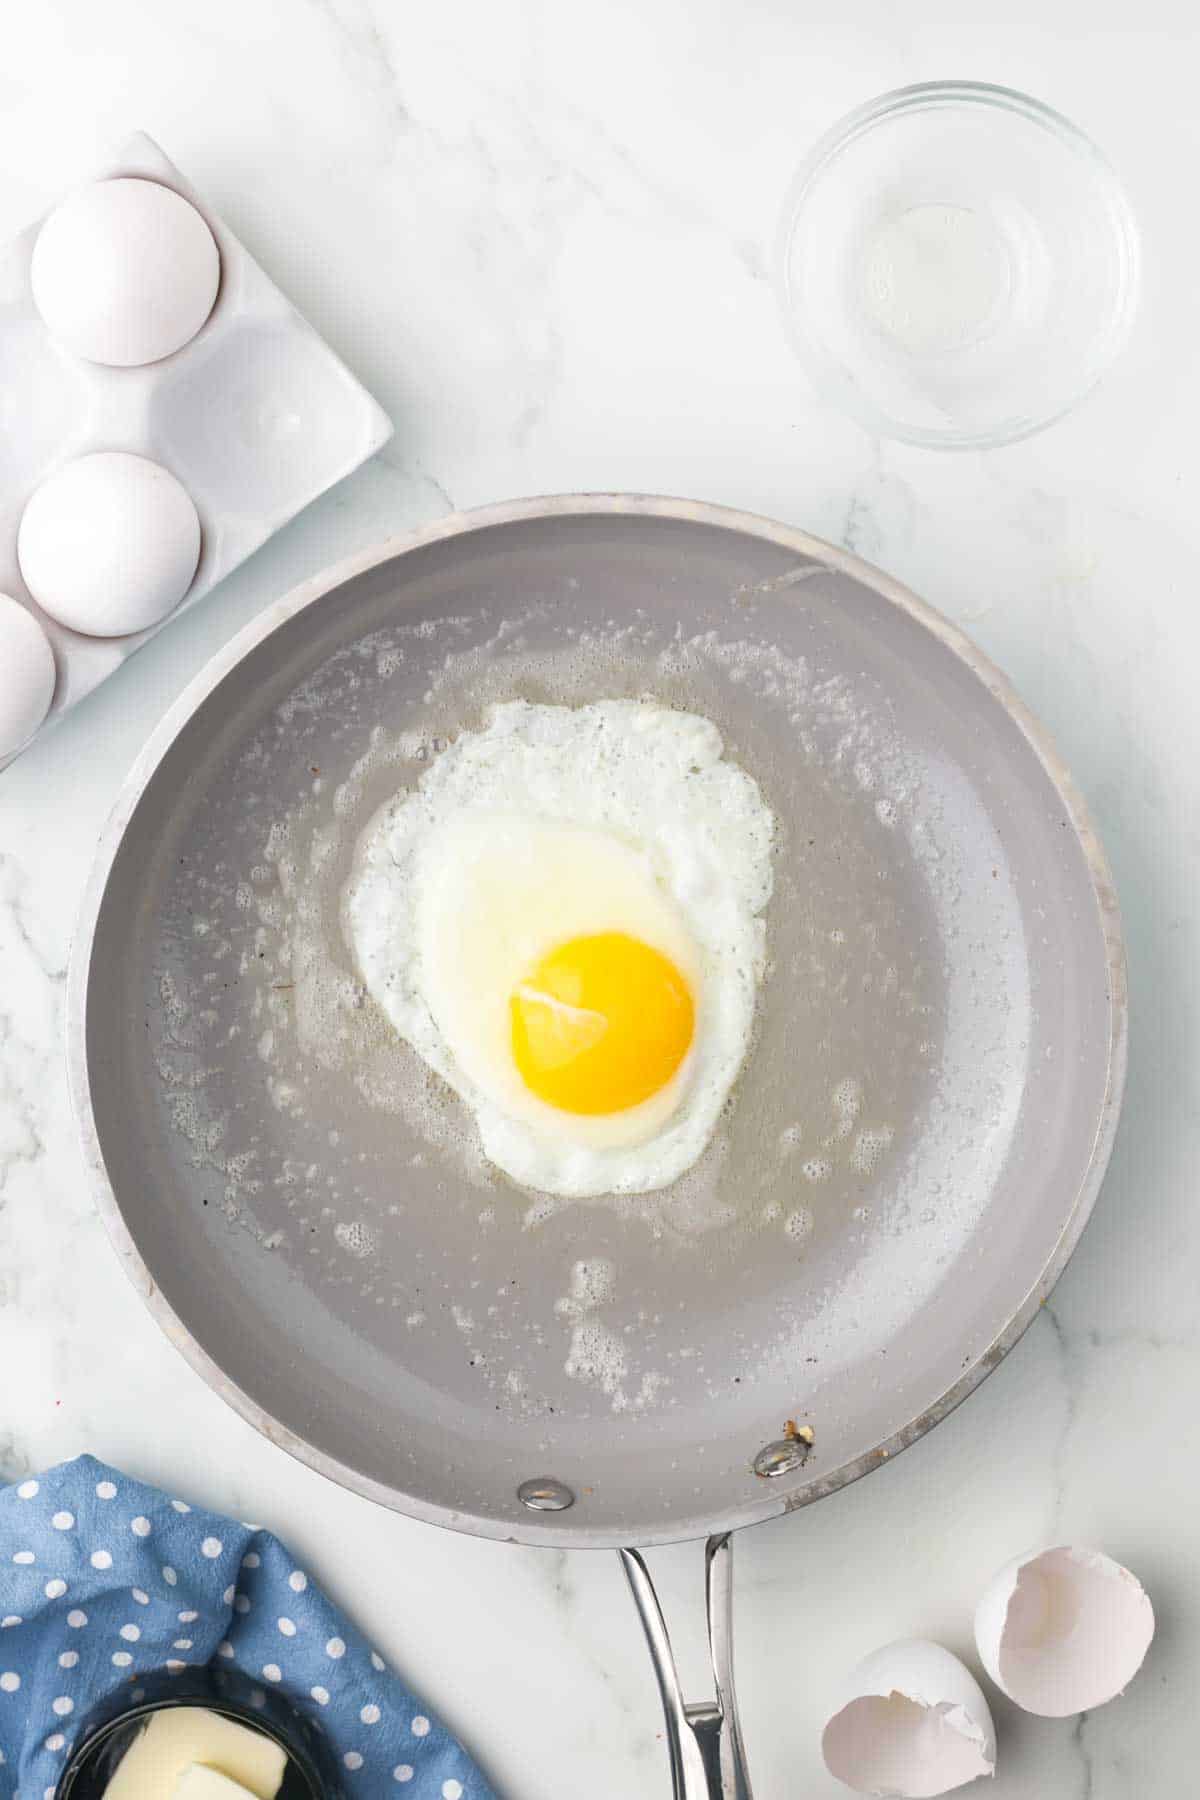 sauté pan with an egg cooking in it